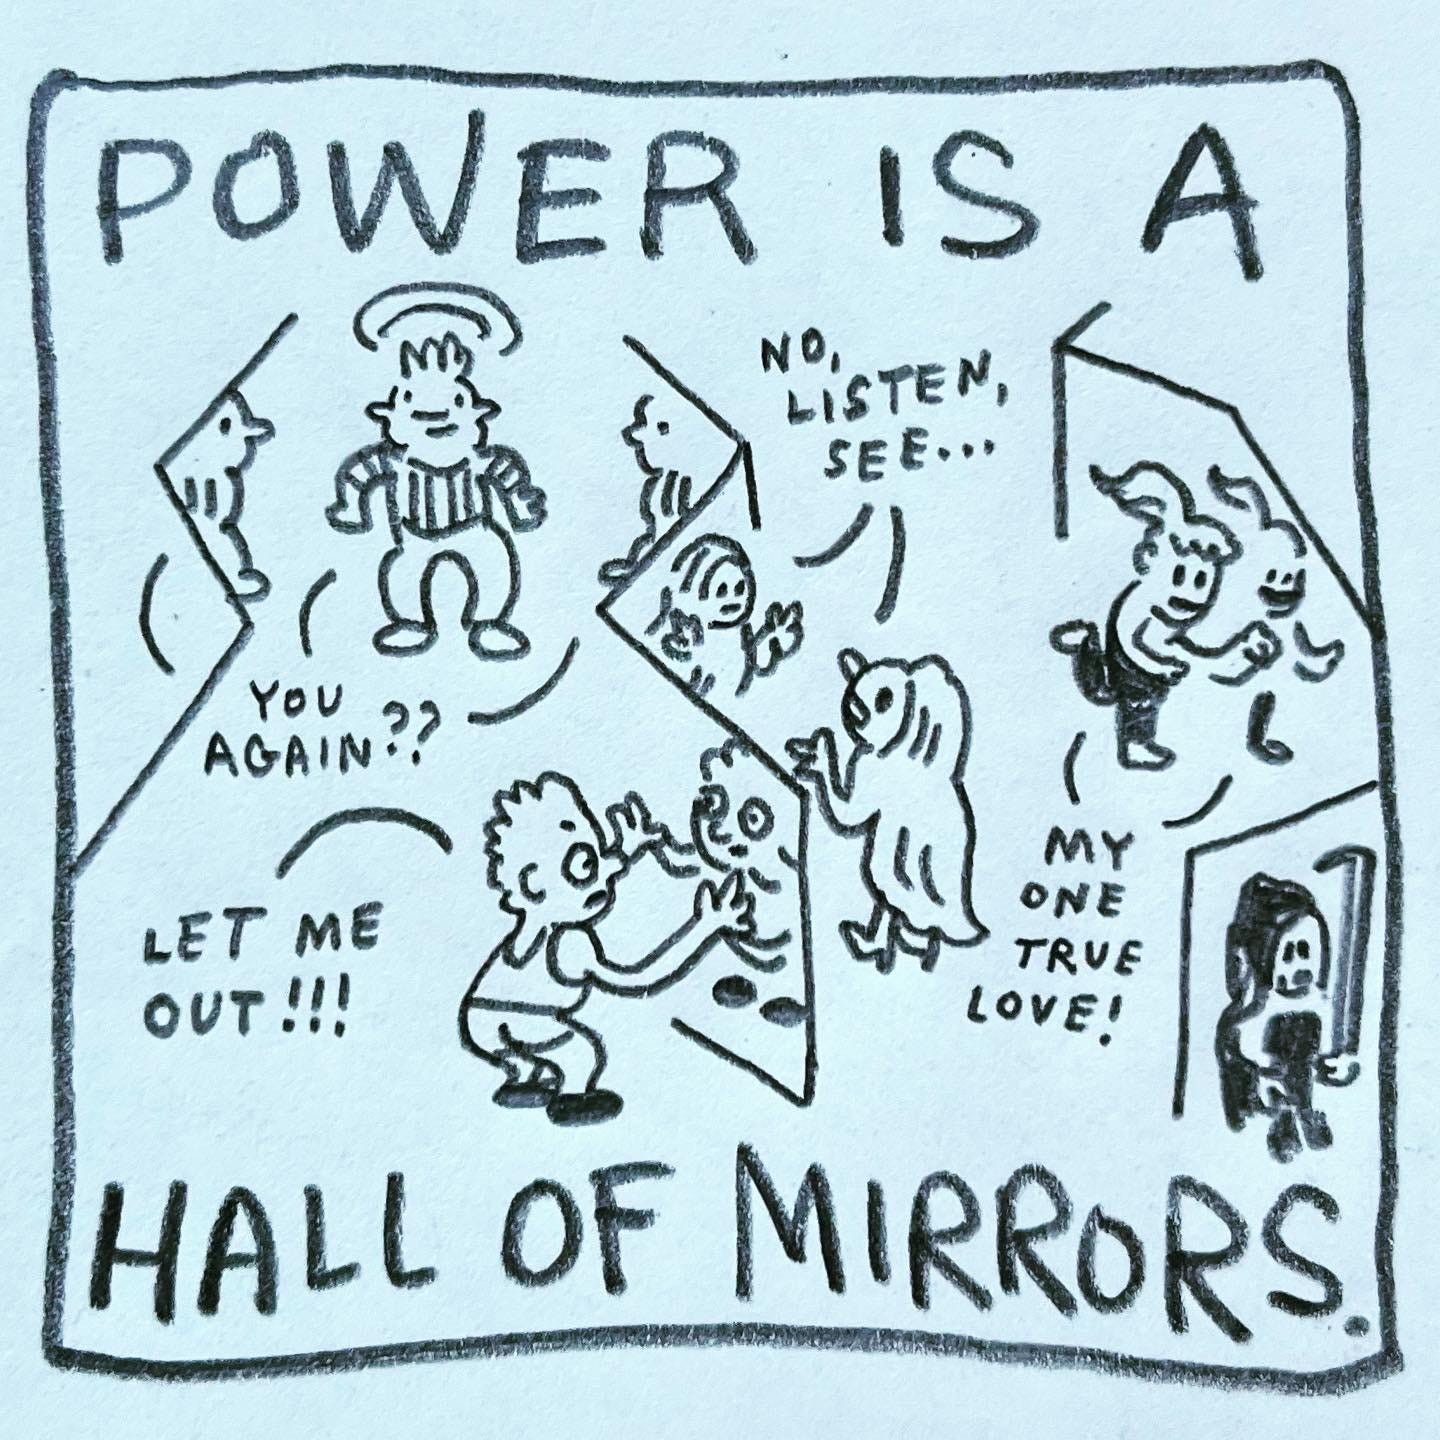 Panel 3: power is a hall of mirrors. Image: four people inside a house of mirrors engage in various ways with their reflections. One, wearing a striped shirt, spins between multiple selves, saying "you again??" One, wearing shorts, places their hands on the mirror and shouts "Let me out!!!" One, wearing a floor length hooded cloak and high heels, argues in the mirror "no, listen, see…" One, running with a ponytail bobbing behind them, calls for ”my one true love"